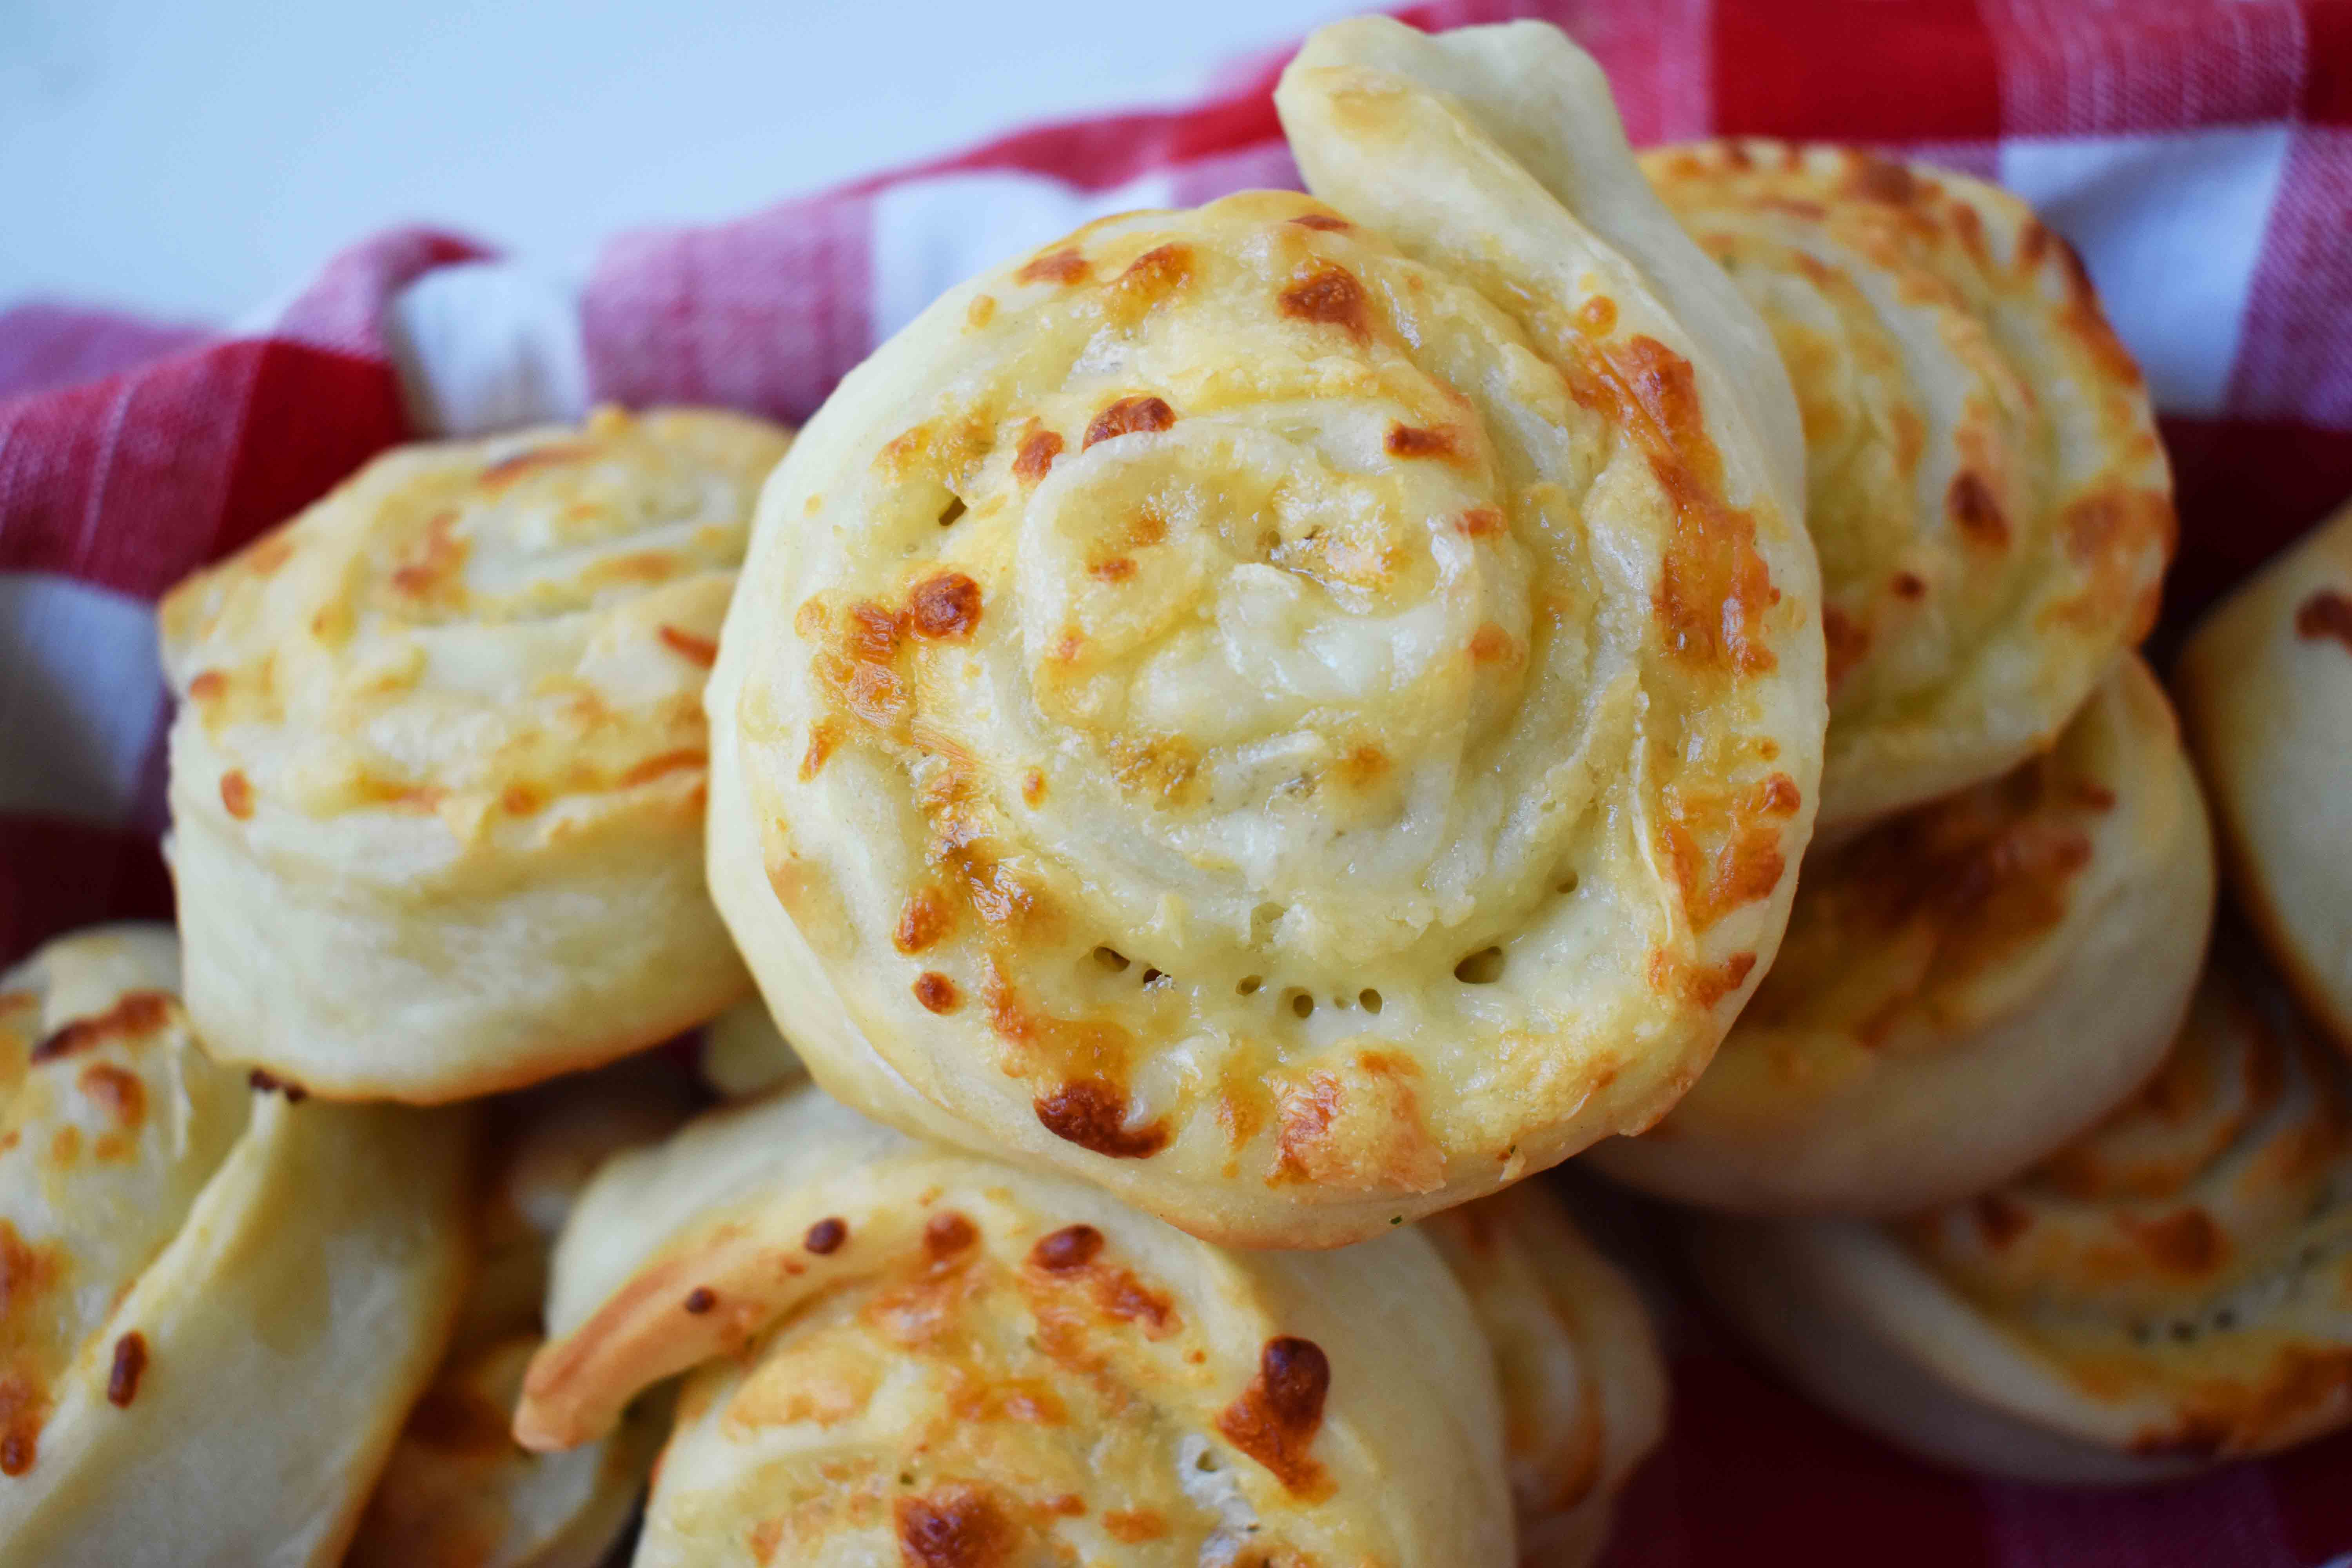 Golden's Garlic Parmesan Cheese Rolls by Modern Honey. Made with 5 simple ingredients -- pizza dough, butter, garlic powder, parmesan and mozzarella cheese. 